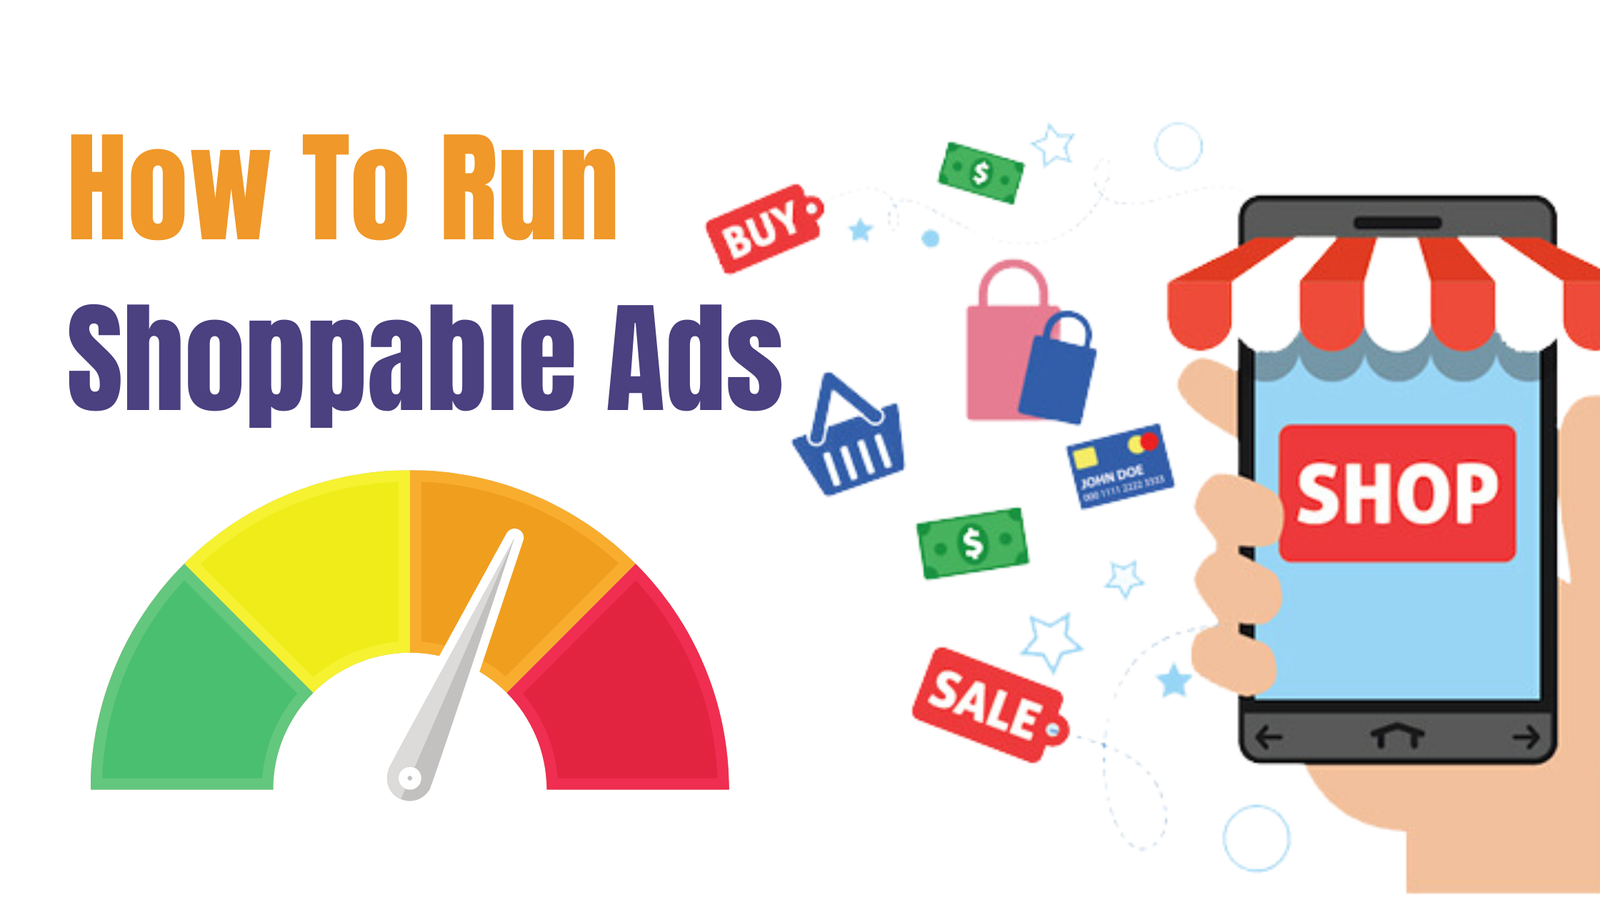 How To Run Shoppable Ads